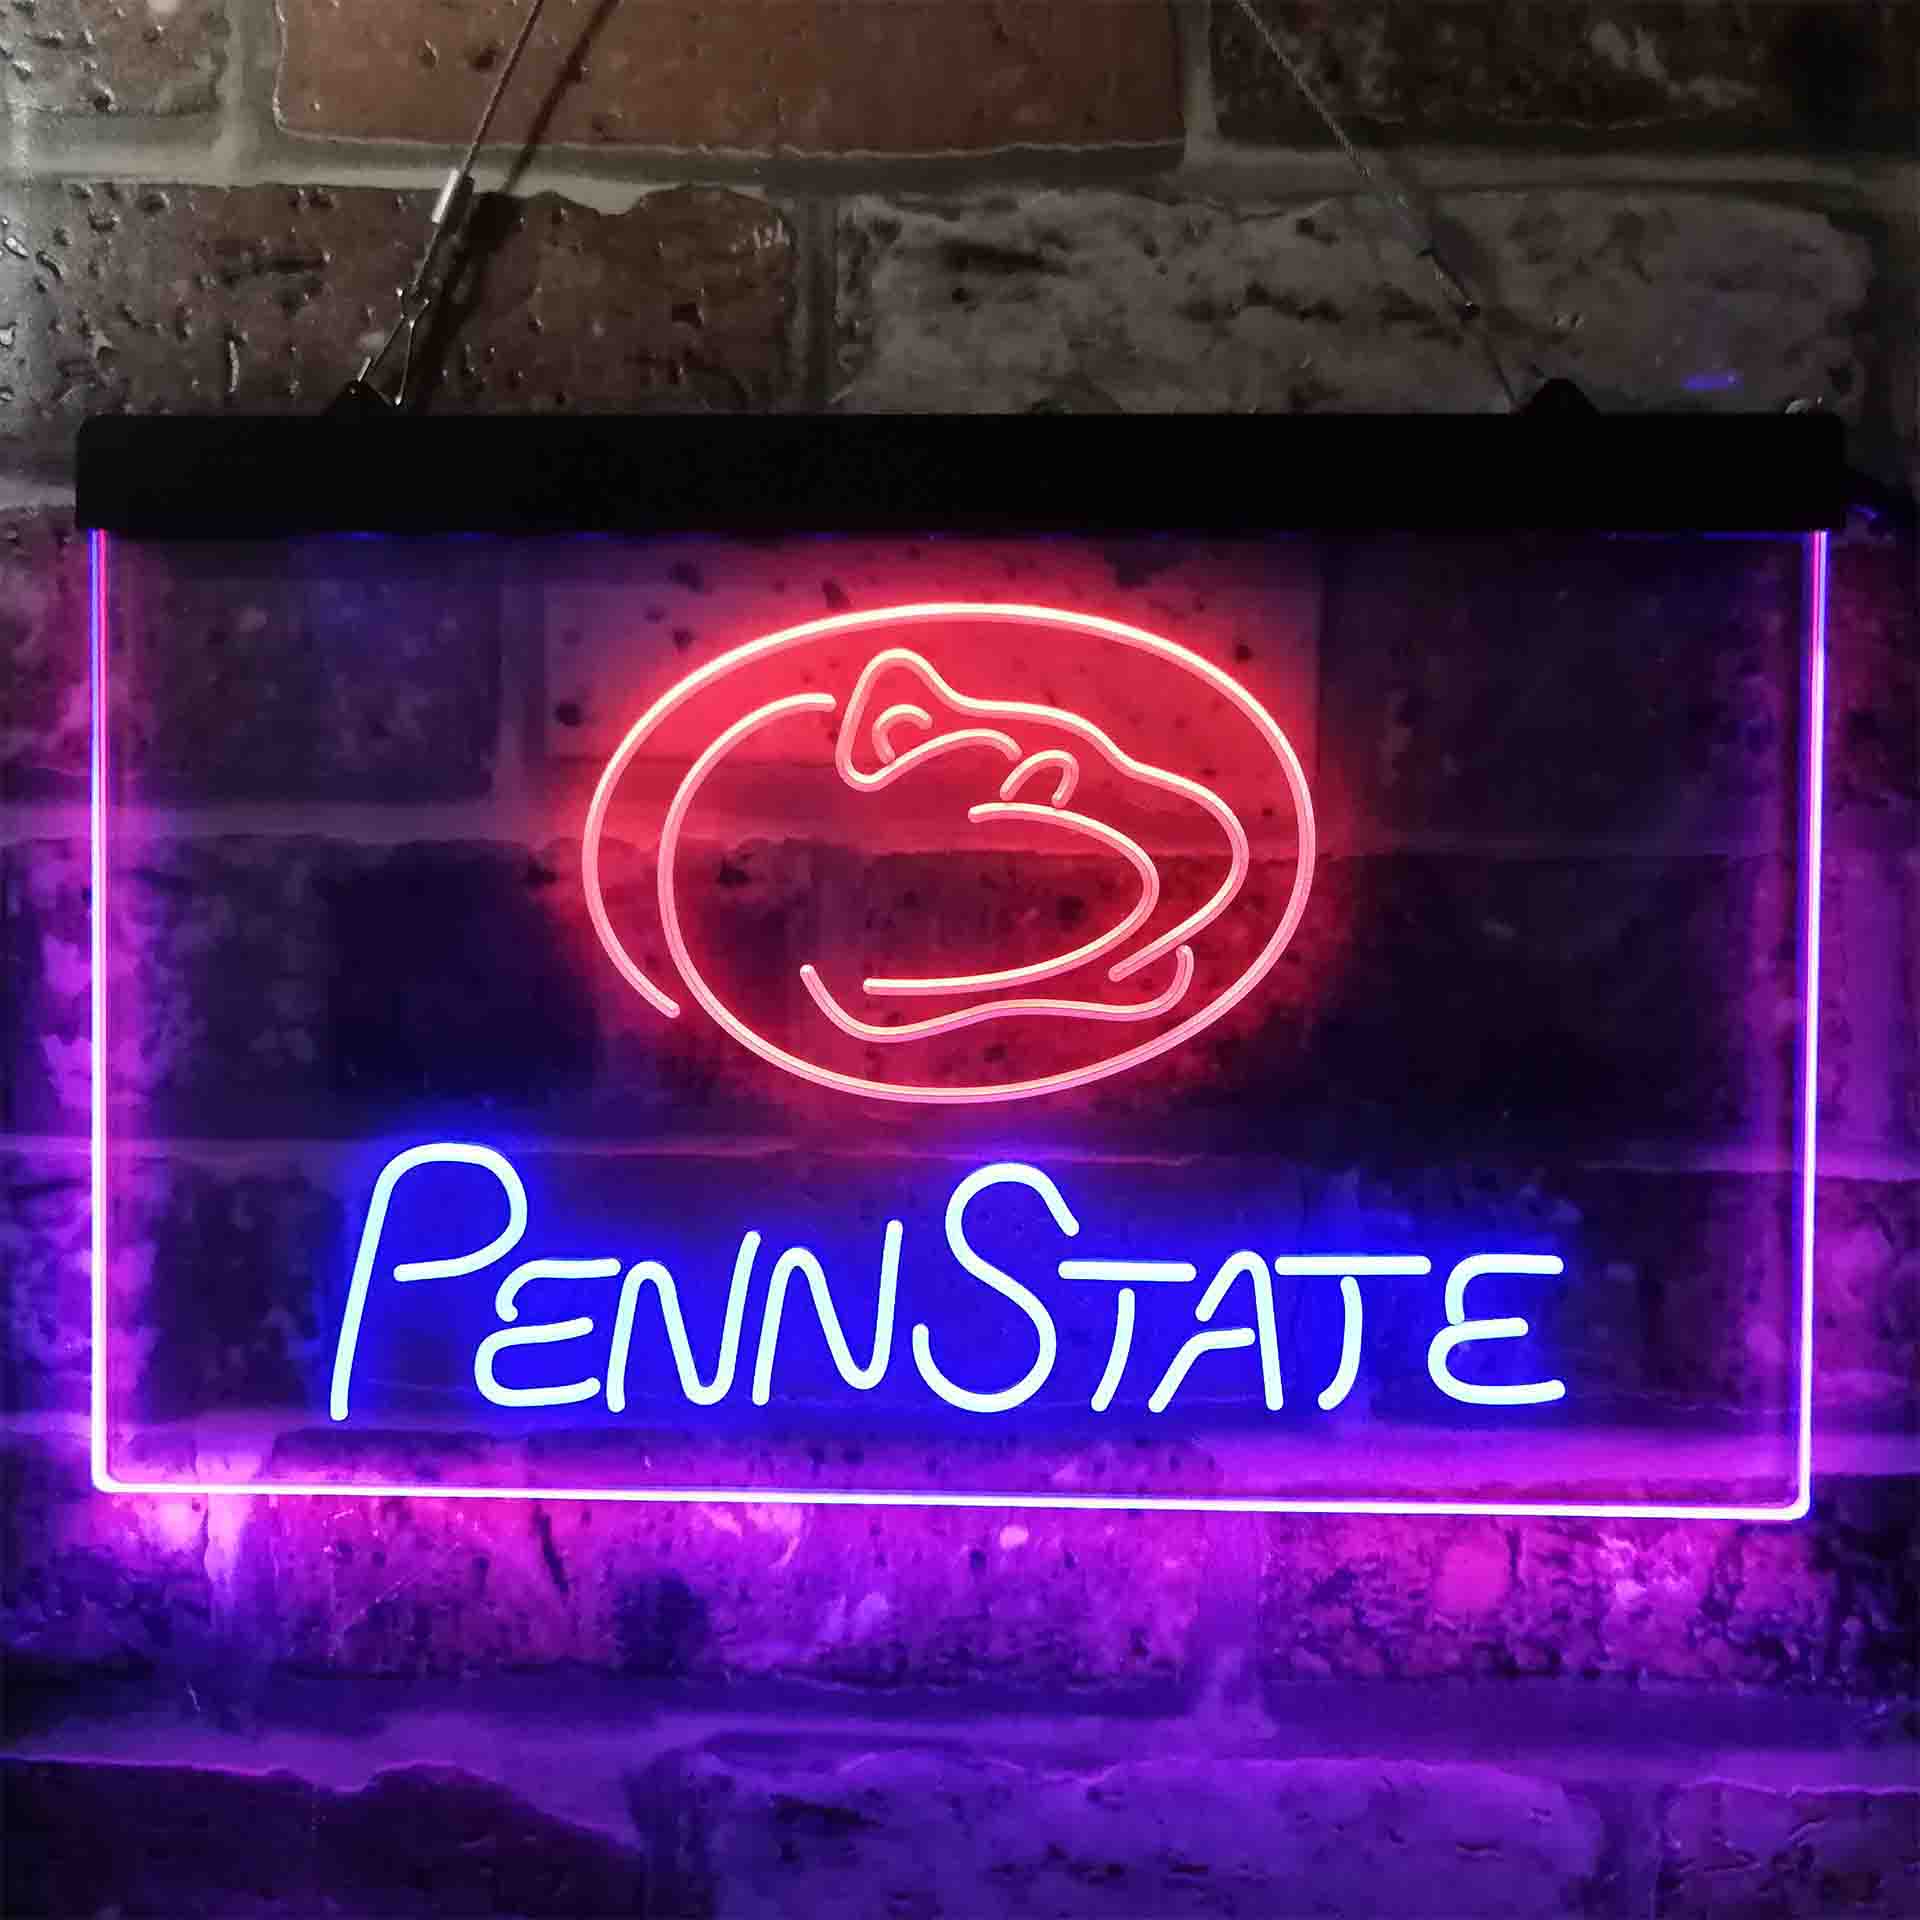 University Sport Team Penn State Nittany Lions NCAA College Neon LED Sign